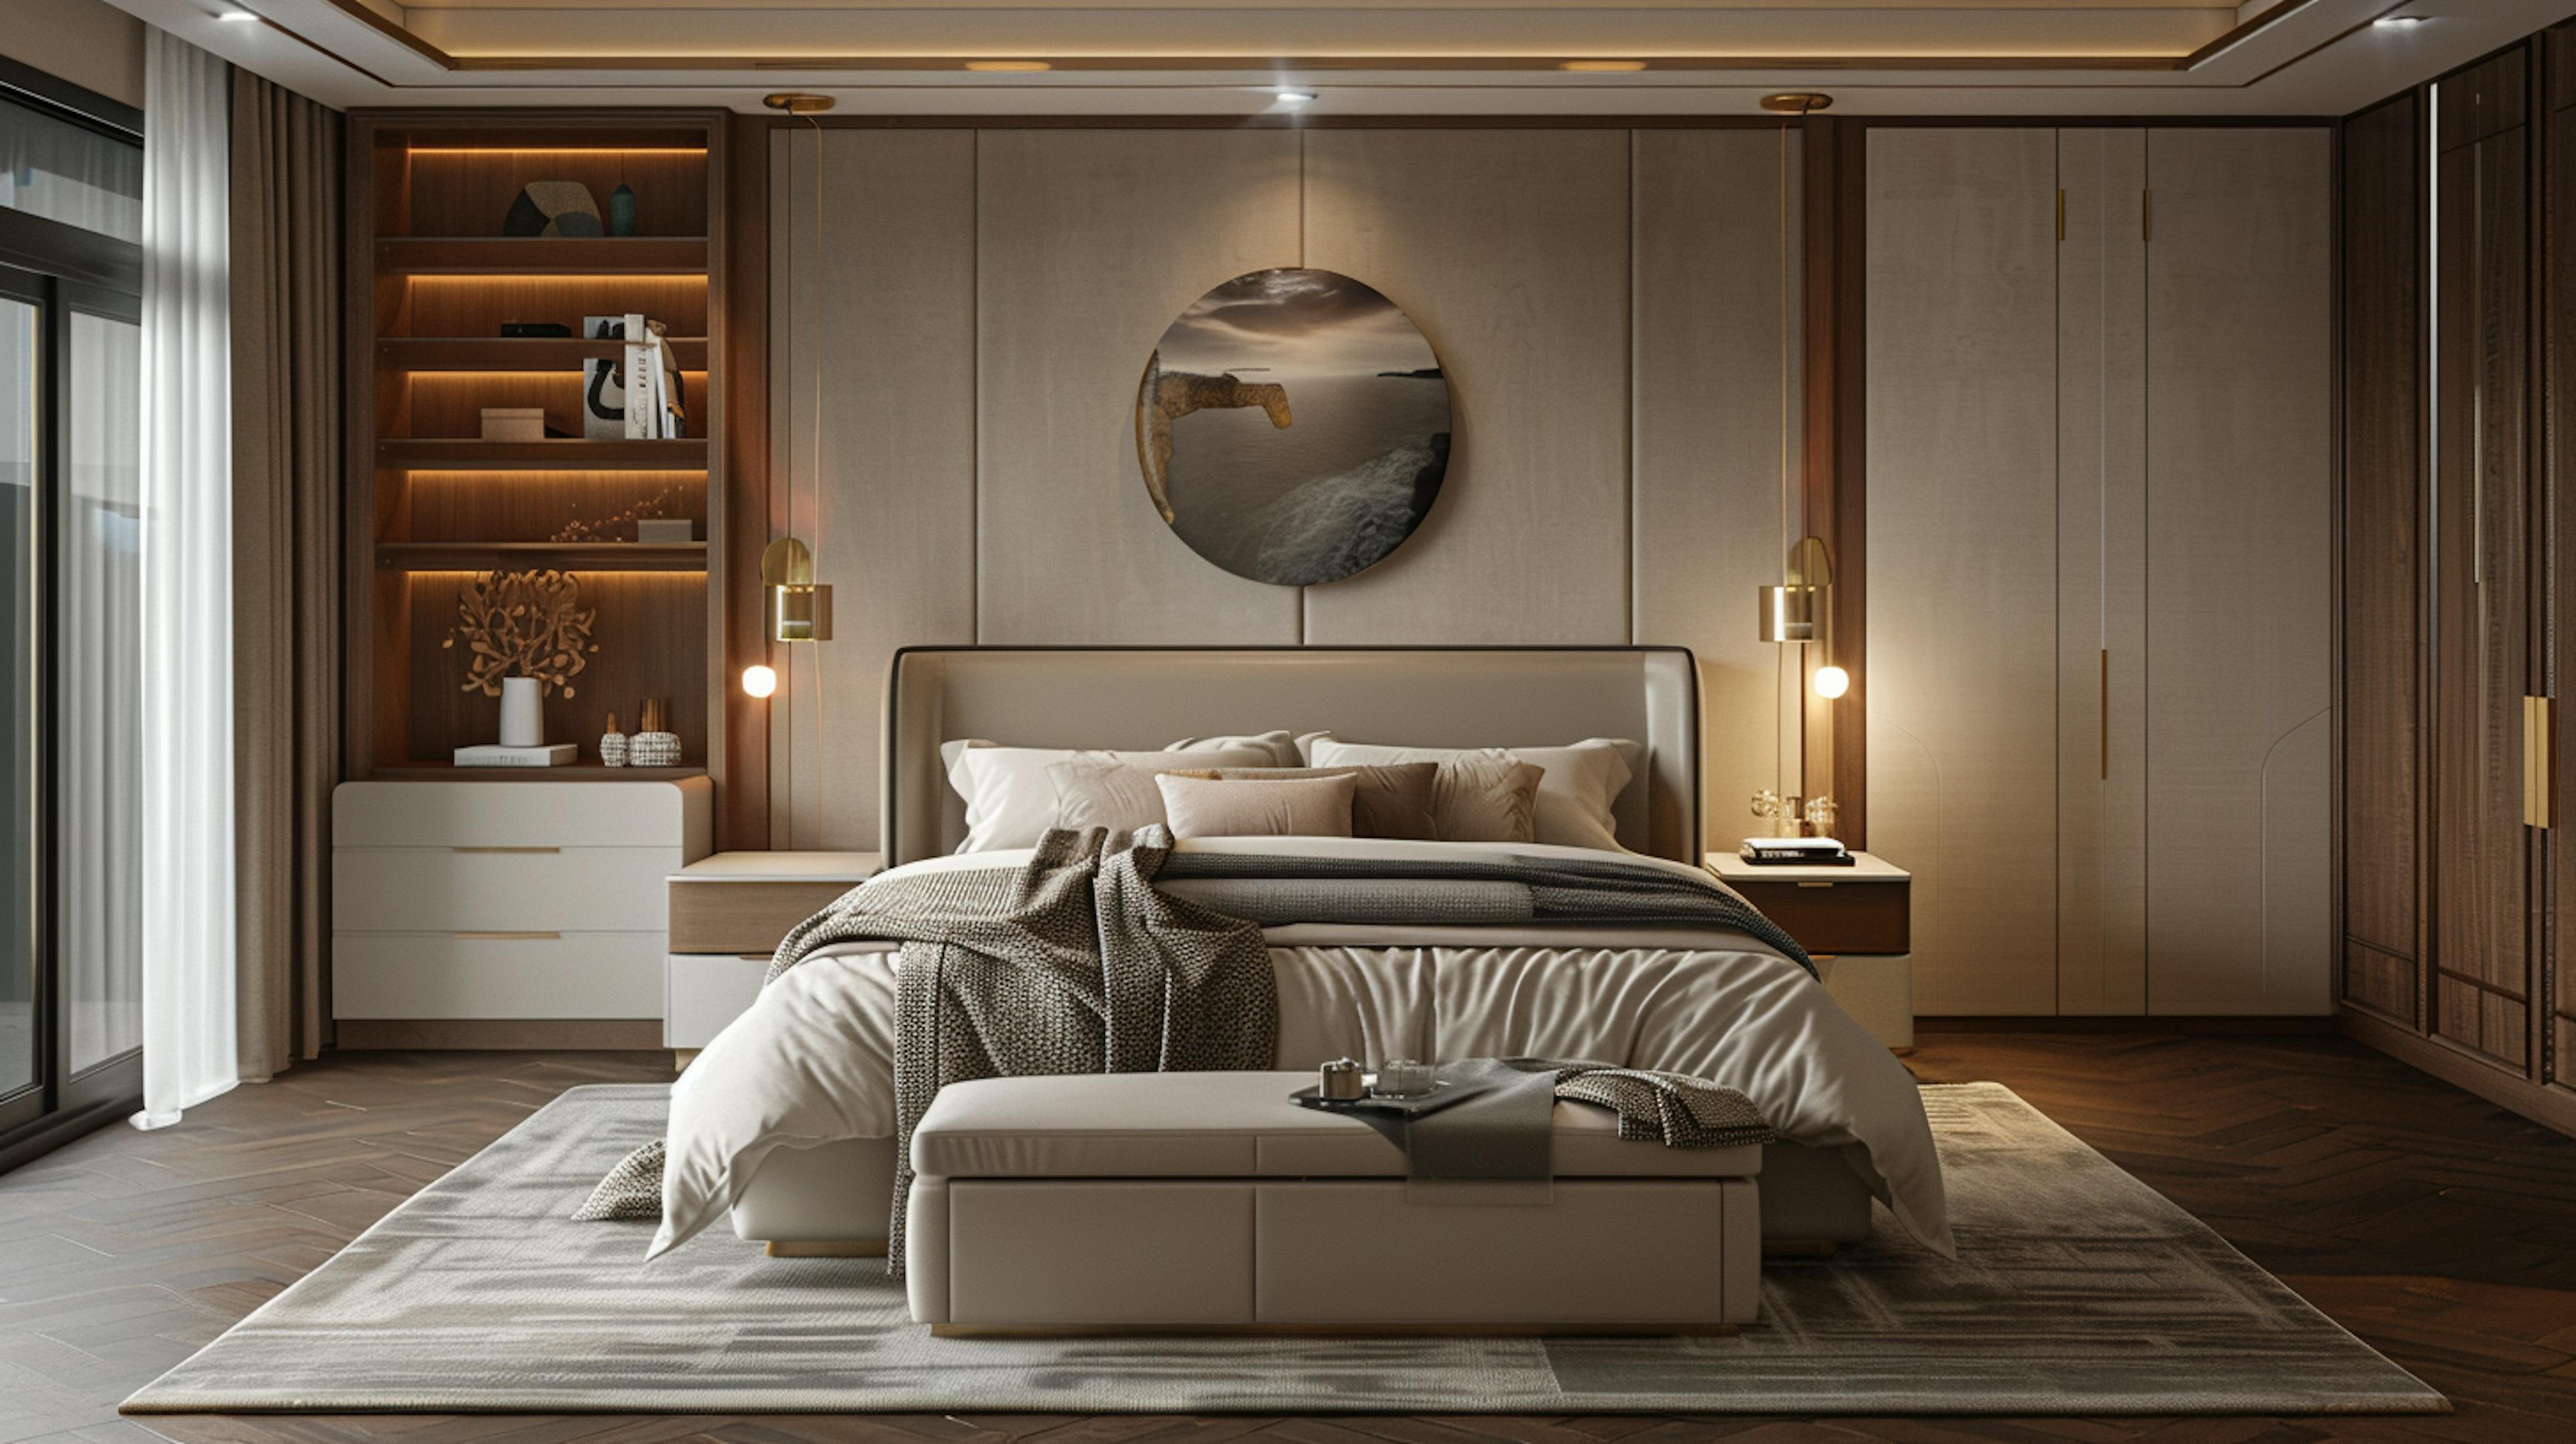 "Contemporary bedroom design with stylish lighting and decor by Eagle Decor"